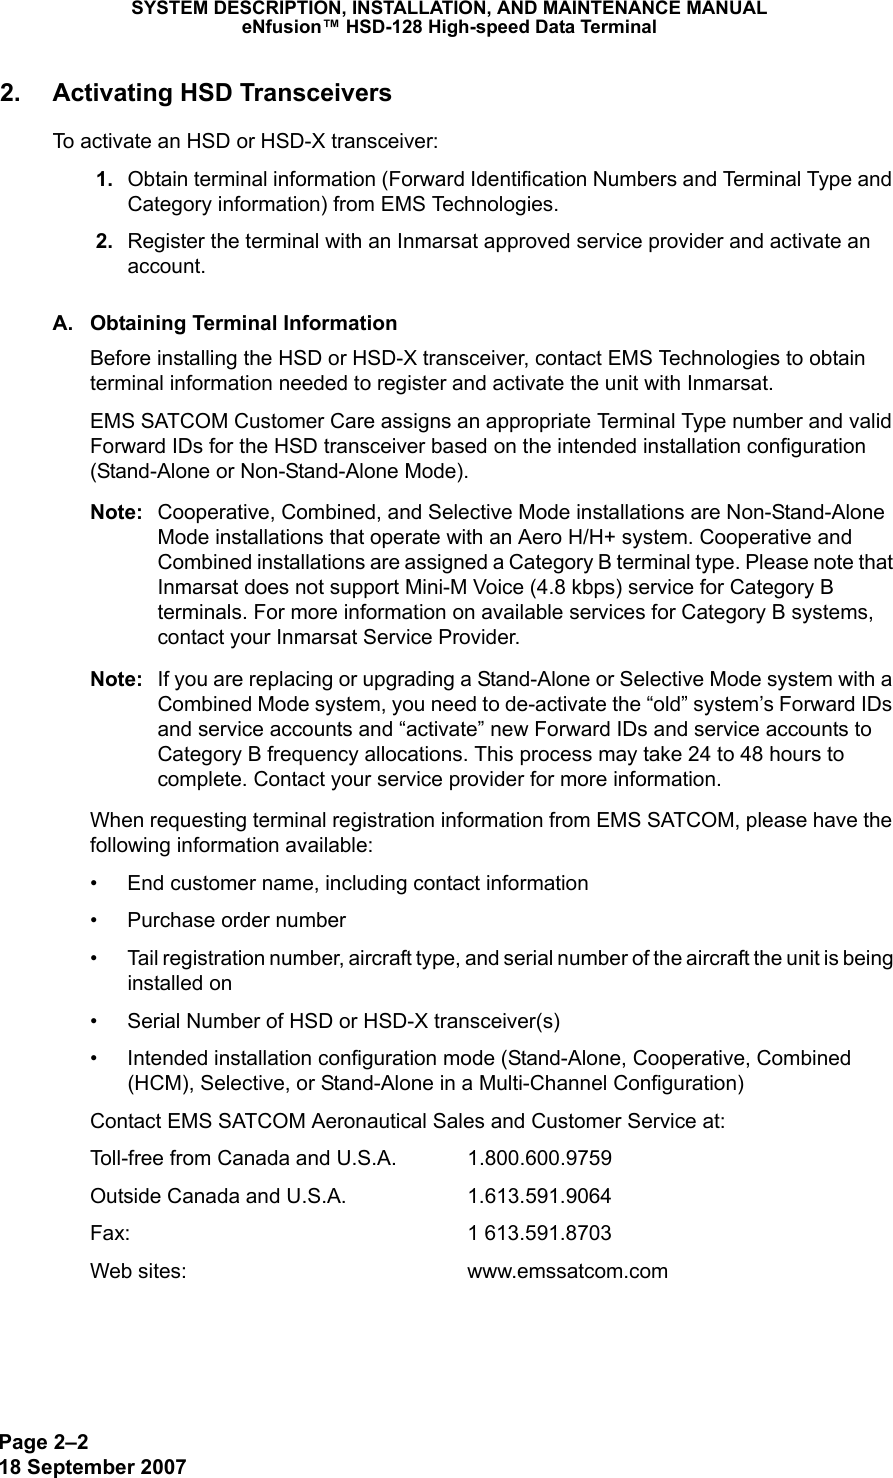 Page 2–218 September 2007SYSTEM DESCRIPTION, INSTALLATION, AND MAINTENANCE MANUALeNfusion™ HSD-128 High-speed Data Terminal2. Activating HSD TransceiversTo activate an HSD or HSD-X transceiver: 1. Obtain terminal information (Forward Identification Numbers and Terminal Type and Category information) from EMS Technologies.  2. Register the terminal with an Inmarsat approved service provider and activate an account. A. Obtaining Terminal InformationBefore installing the HSD or HSD-X transceiver, contact EMS Technologies to obtain terminal information needed to register and activate the unit with Inmarsat. EMS SATCOM Customer Care assigns an appropriate Terminal Type number and valid Forward IDs for the HSD transceiver based on the intended installation configuration (Stand-Alone or Non-Stand-Alone Mode). Note: Cooperative, Combined, and Selective Mode installations are Non-Stand-Alone Mode installations that operate with an Aero H/H+ system. Cooperative and Combined installations are assigned a Category B terminal type. Please note that Inmarsat does not support Mini-M Voice (4.8 kbps) service for Category B terminals. For more information on available services for Category B systems, contact your Inmarsat Service Provider. Note: If you are replacing or upgrading a Stand-Alone or Selective Mode system with a Combined Mode system, you need to de-activate the “old” system’s Forward IDs and service accounts and “activate” new Forward IDs and service accounts to Category B frequency allocations. This process may take 24 to 48 hours to complete. Contact your service provider for more information.When requesting terminal registration information from EMS SATCOM, please have the following information available:• End customer name, including contact information• Purchase order number• Tail registration number, aircraft type, and serial number of the aircraft the unit is being installed on• Serial Number of HSD or HSD-X transceiver(s)• Intended installation configuration mode (Stand-Alone, Cooperative, Combined (HCM), Selective, or Stand-Alone in a Multi-Channel Configuration)Contact EMS SATCOM Aeronautical Sales and Customer Service at: Toll-free from Canada and U.S.A. 1.800.600.9759Outside Canada and U.S.A.  1.613.591.9064Fax: 1 613.591.8703Web sites:  www.emssatcom.com